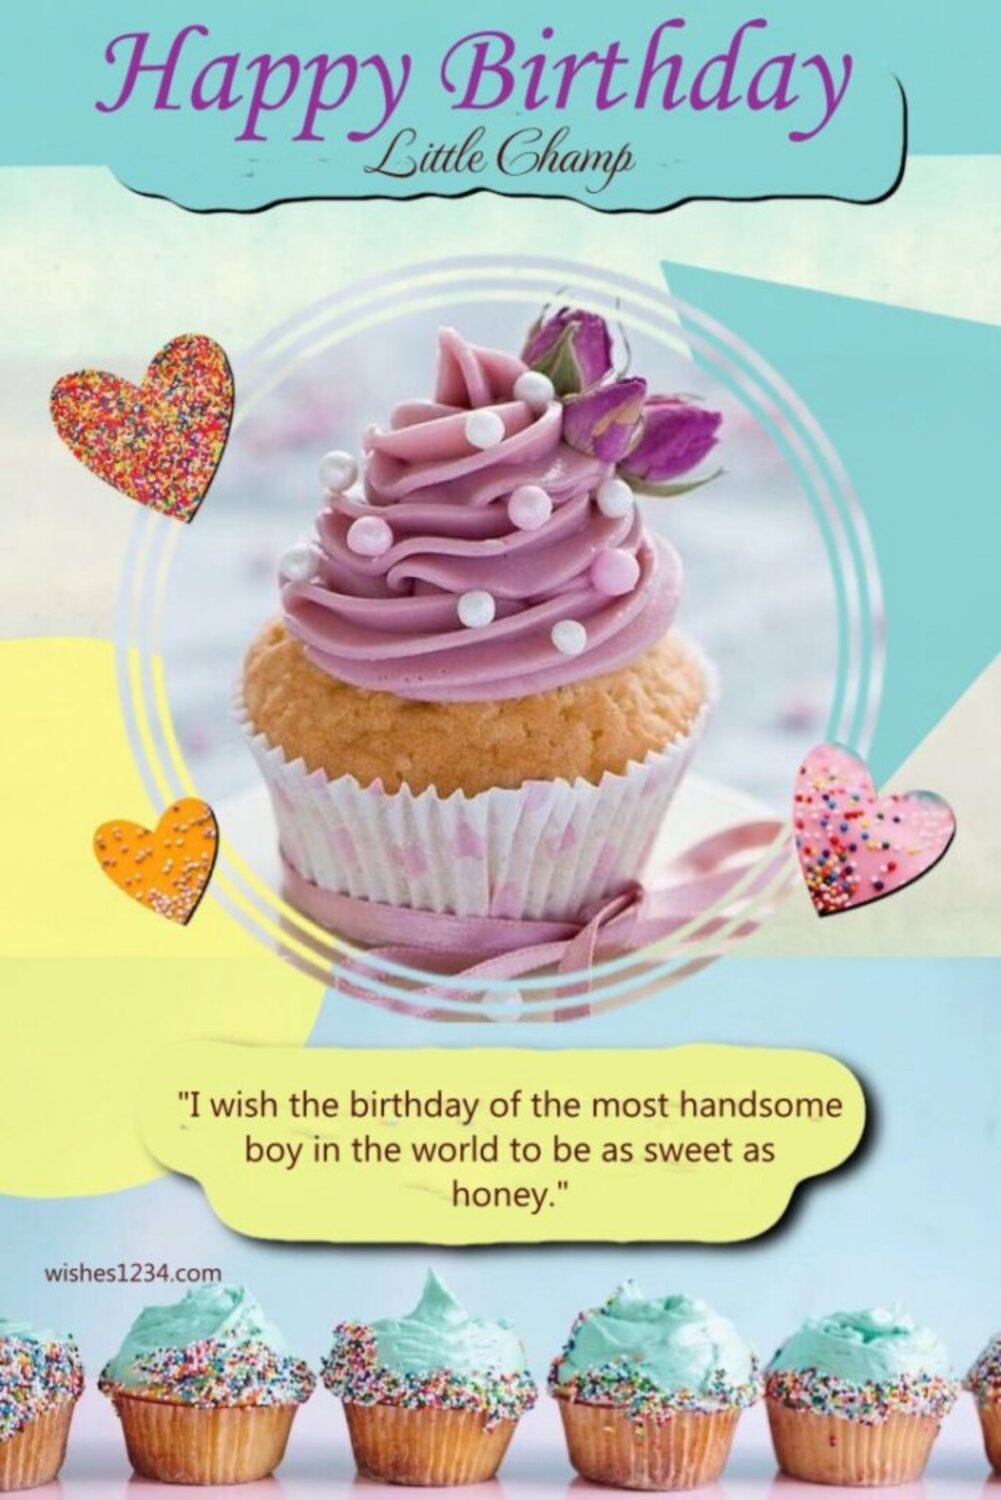 Cupcake with pink cream and hearts, Kids birthday | Happy Birthday wishes for kids.